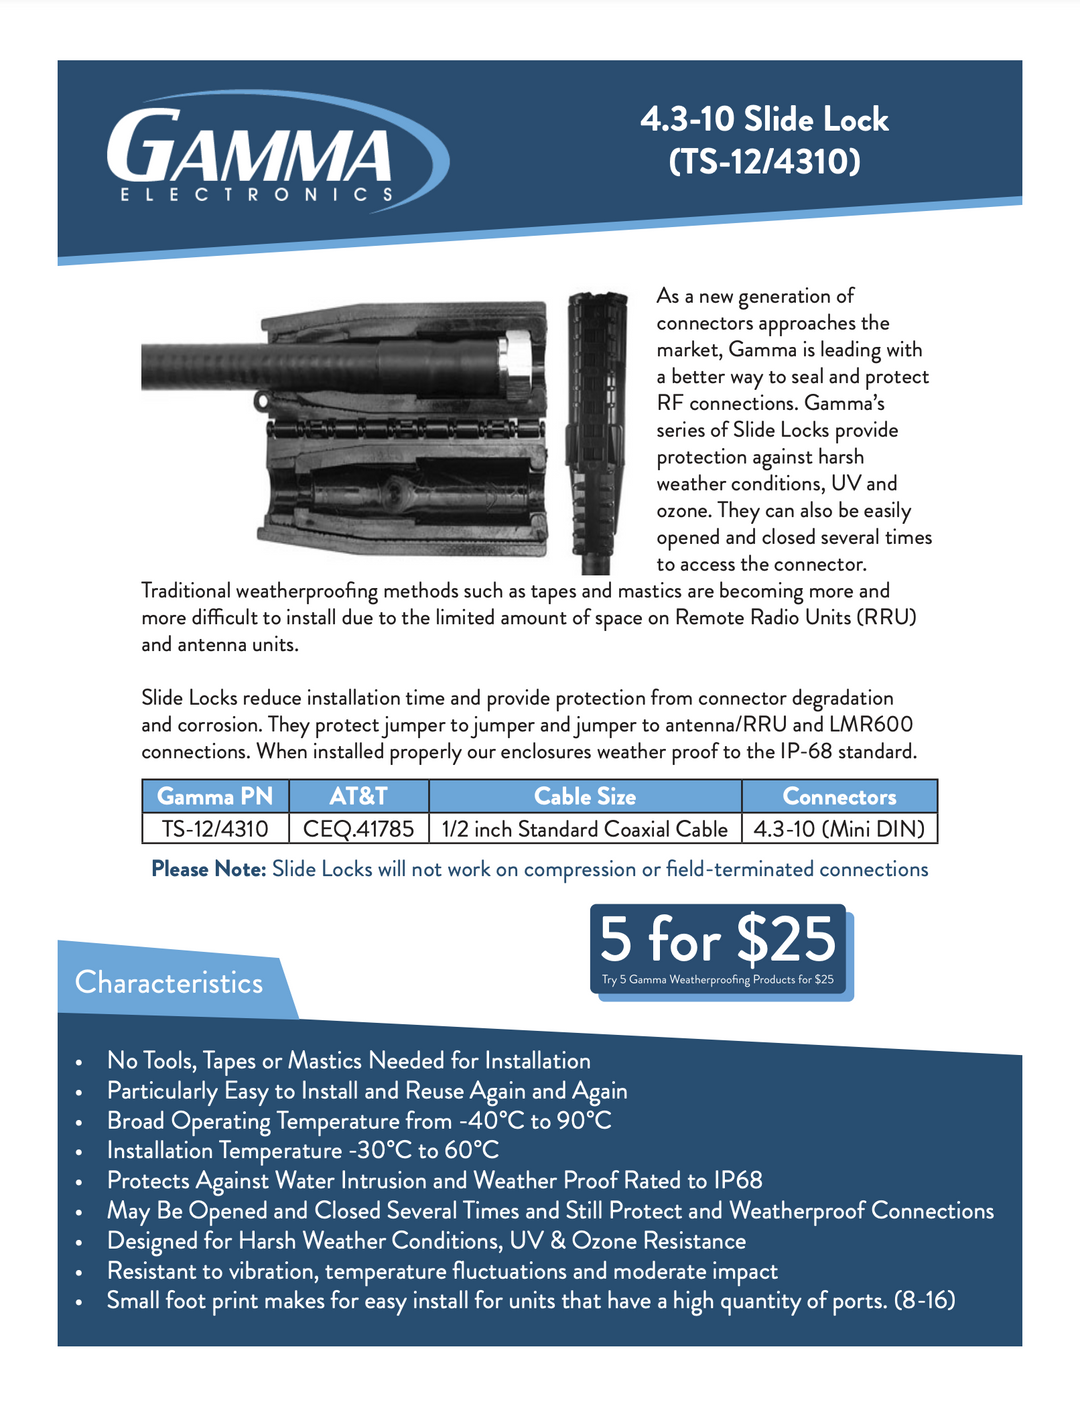 Watertight, IP68 Level Weather Protection for 4.3-10 DIN Connections - Gamma Electronics